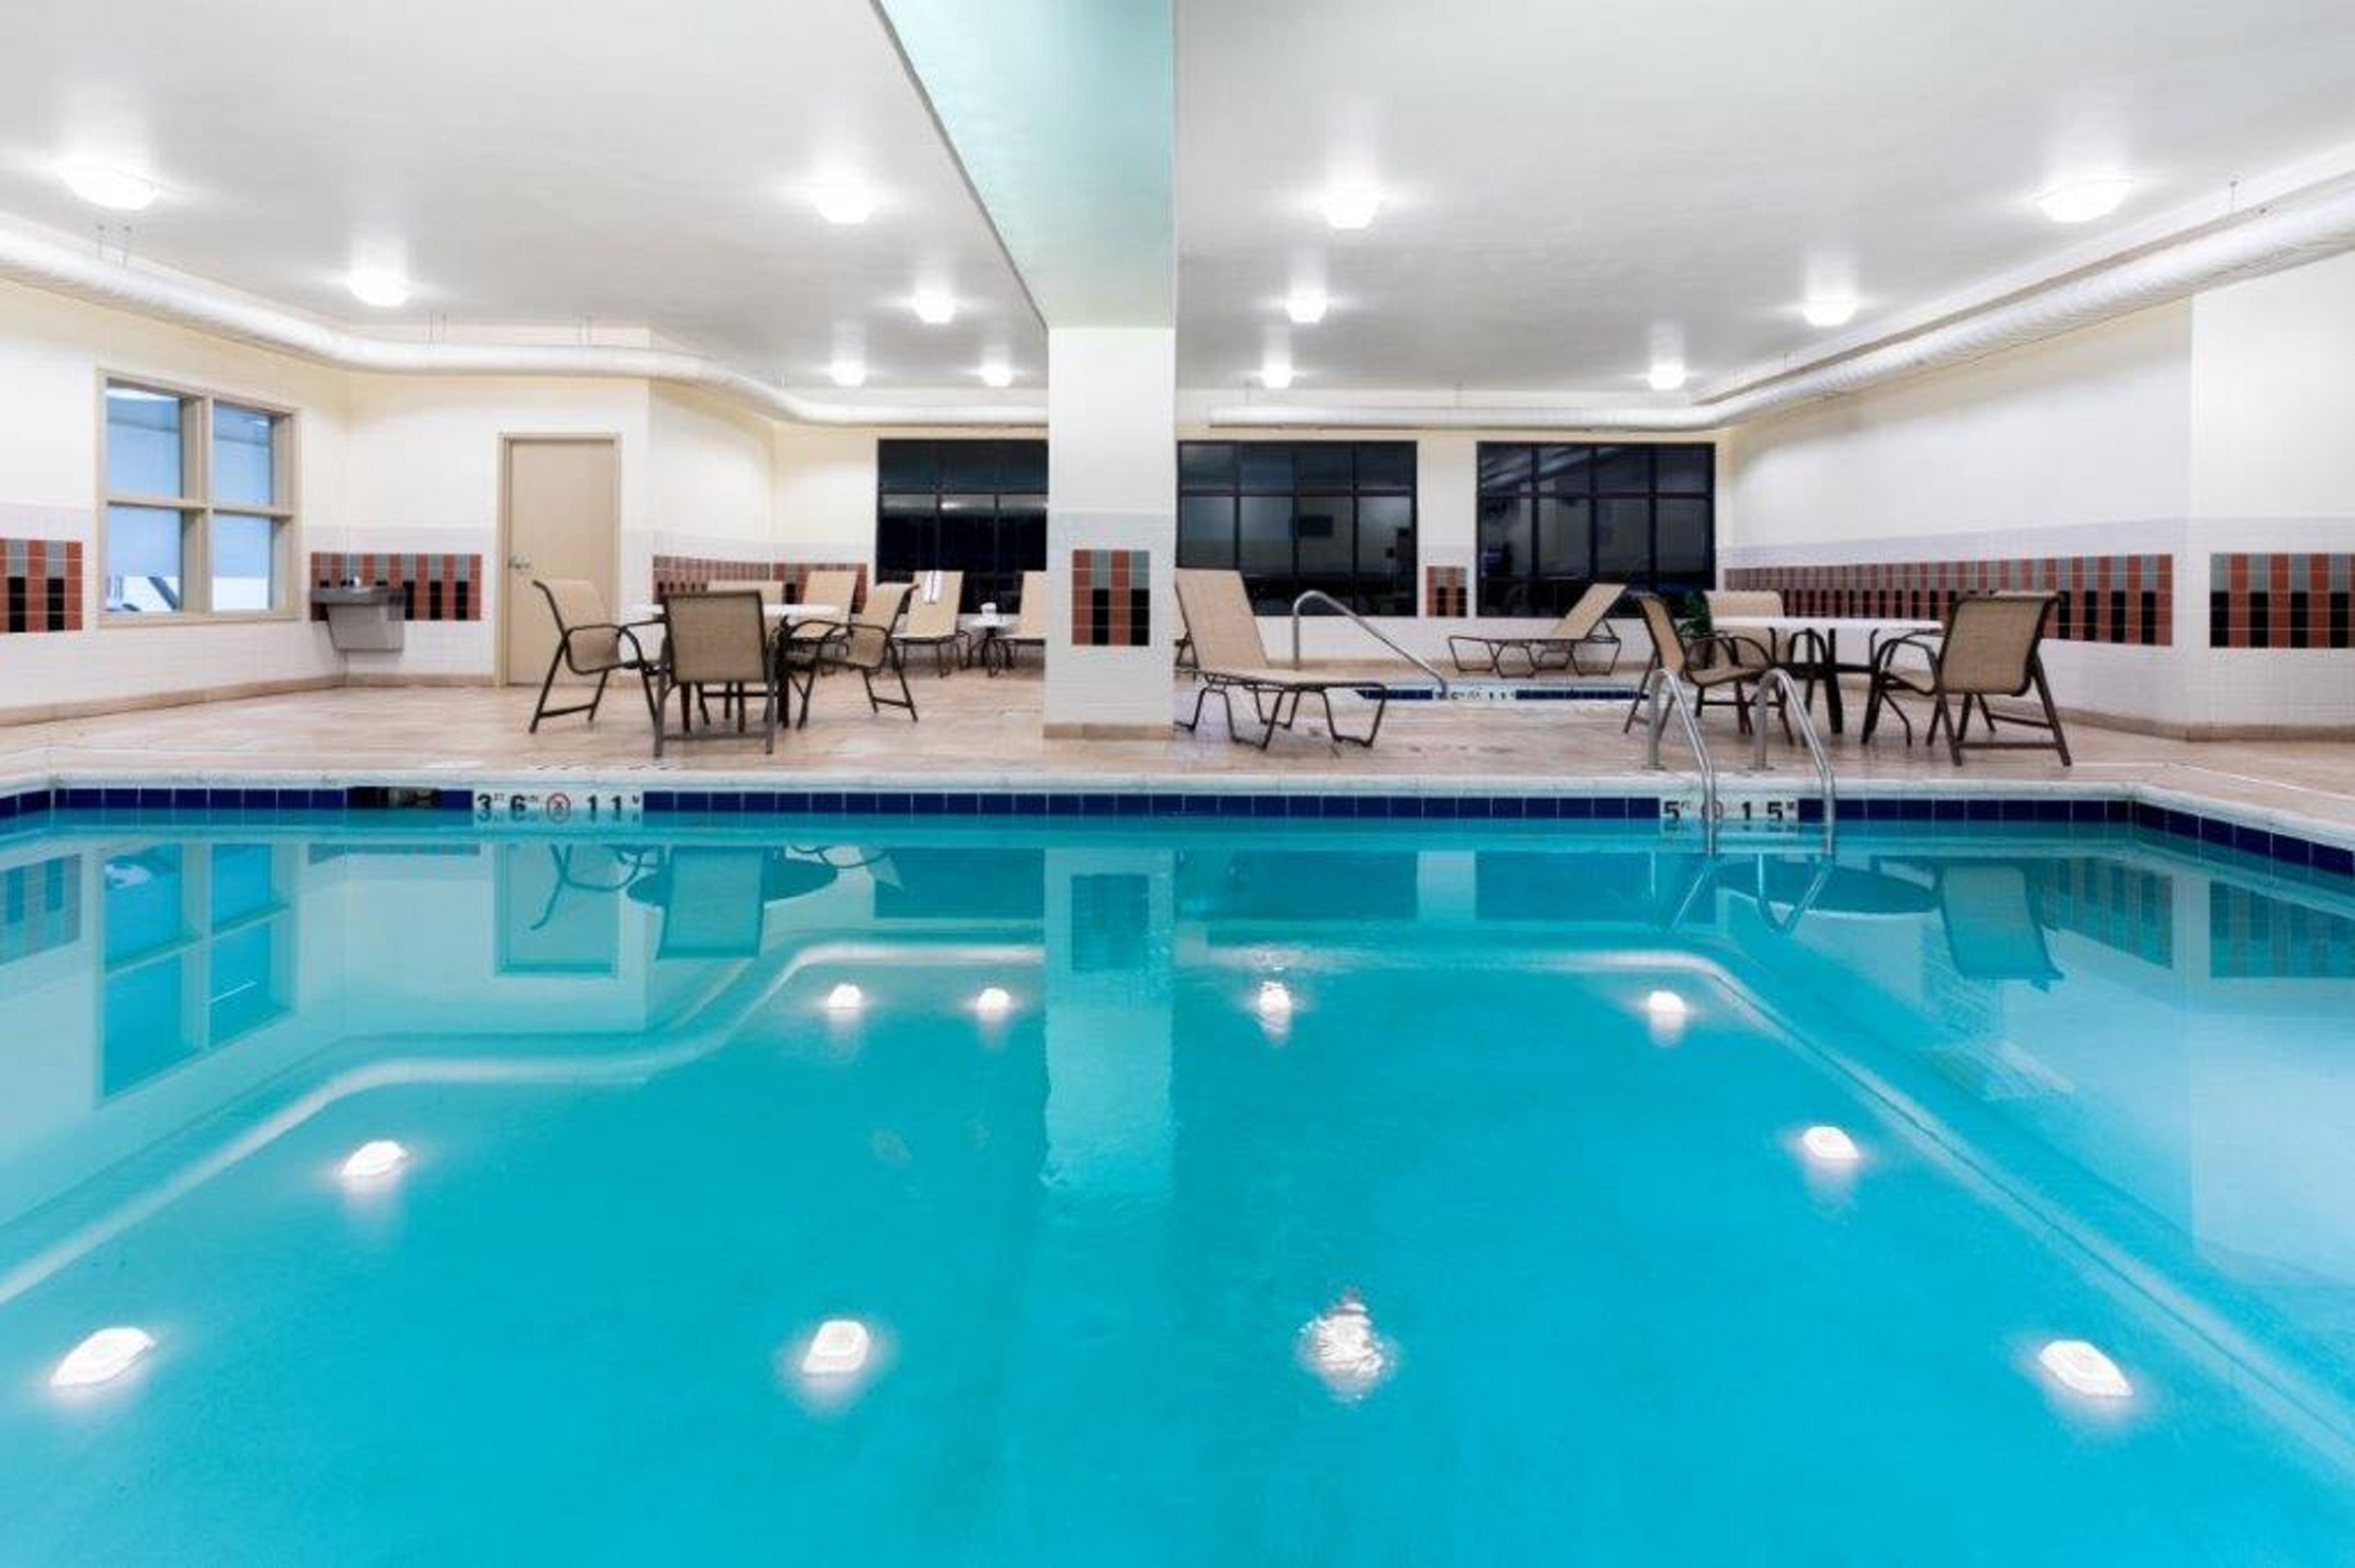 Indoor pool with tables and chairs